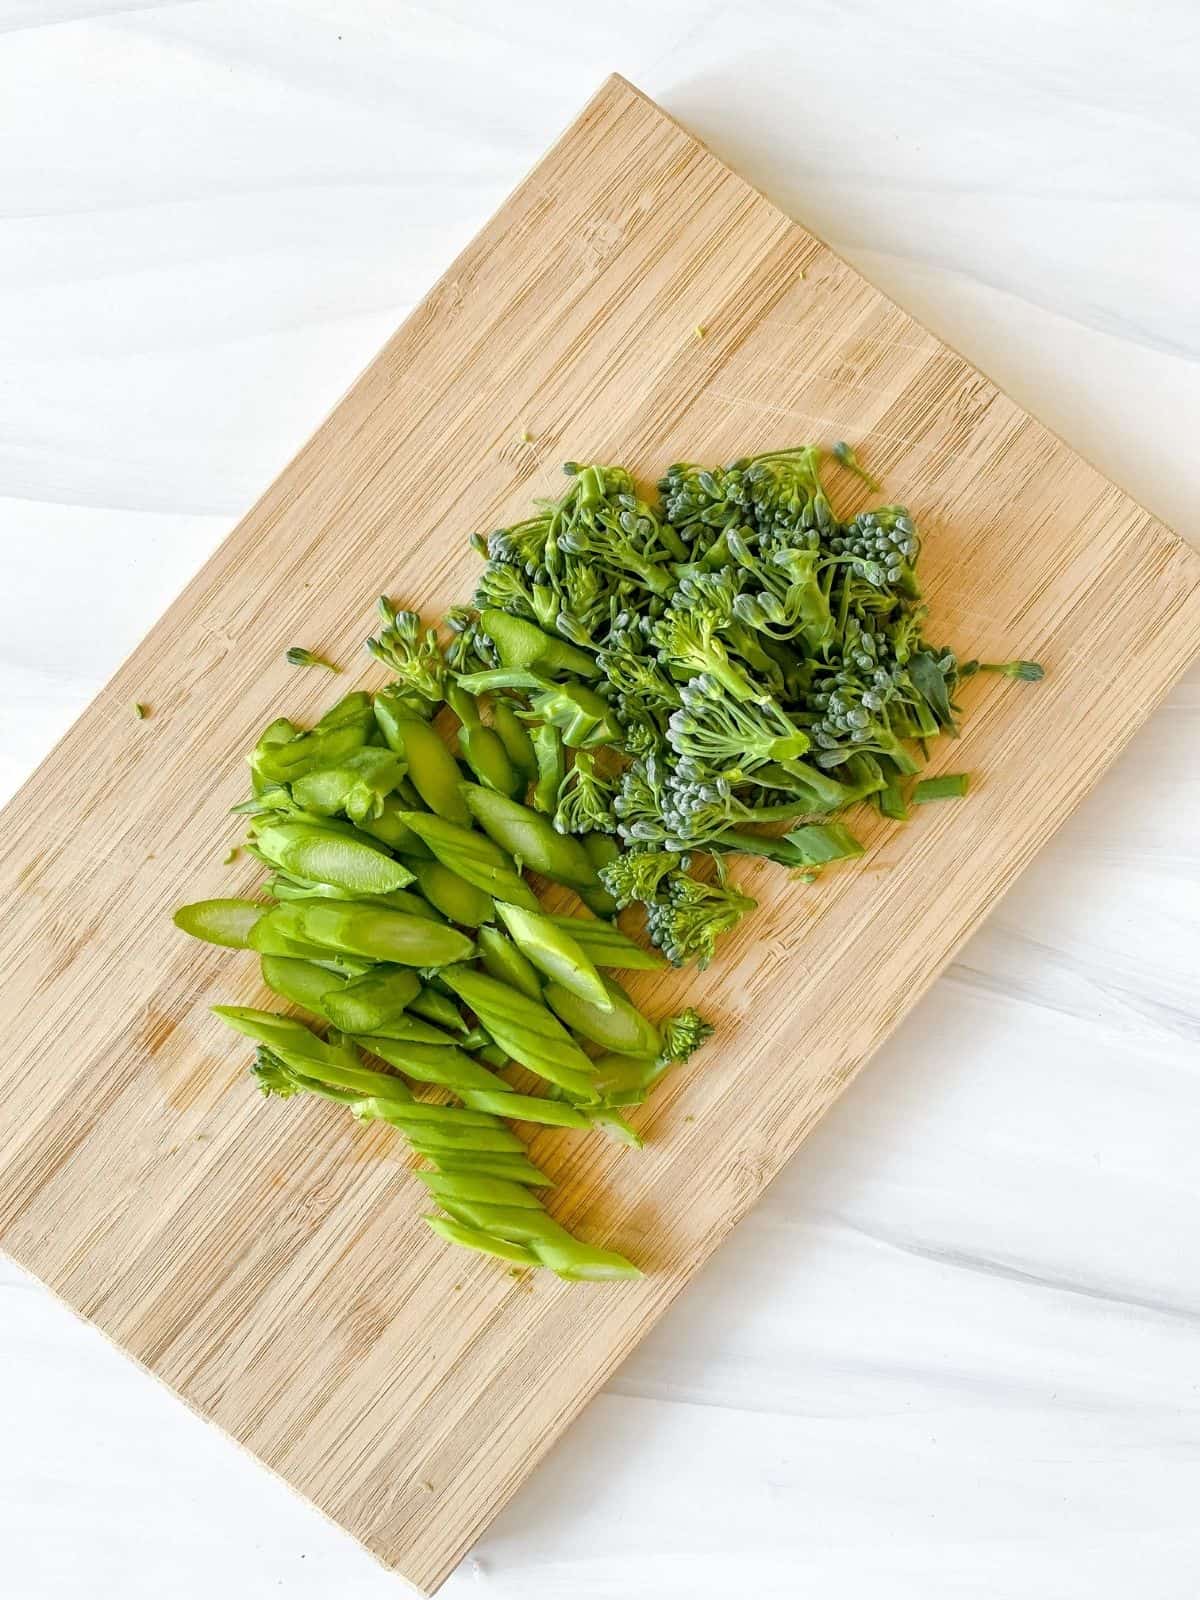 diced broccolini on a wooden board.